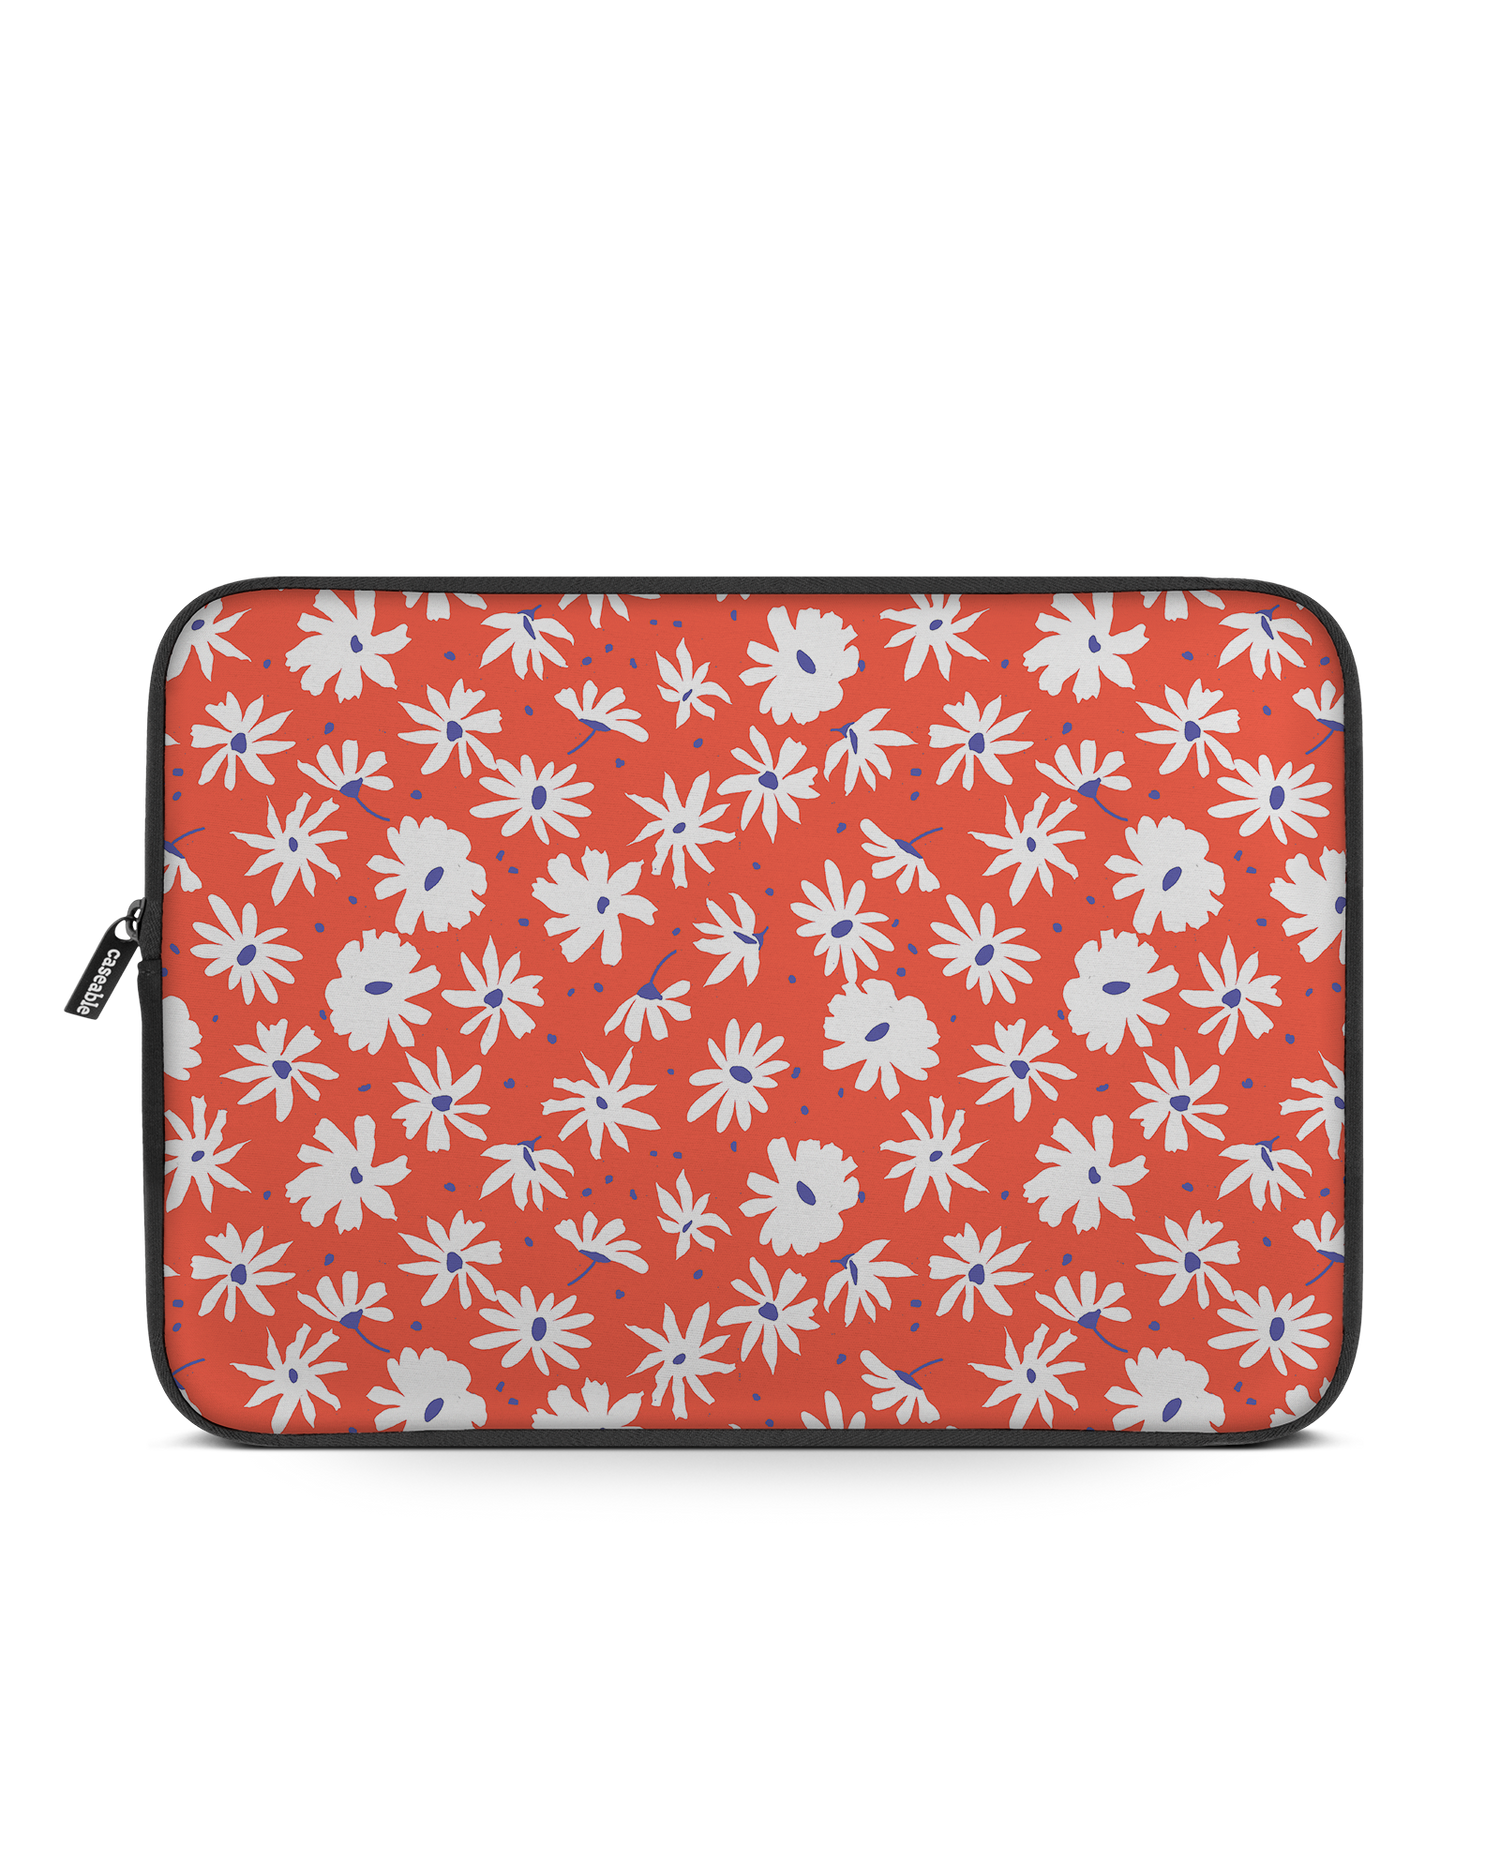 Retro Daisy Laptop Case 16 inch: Front View